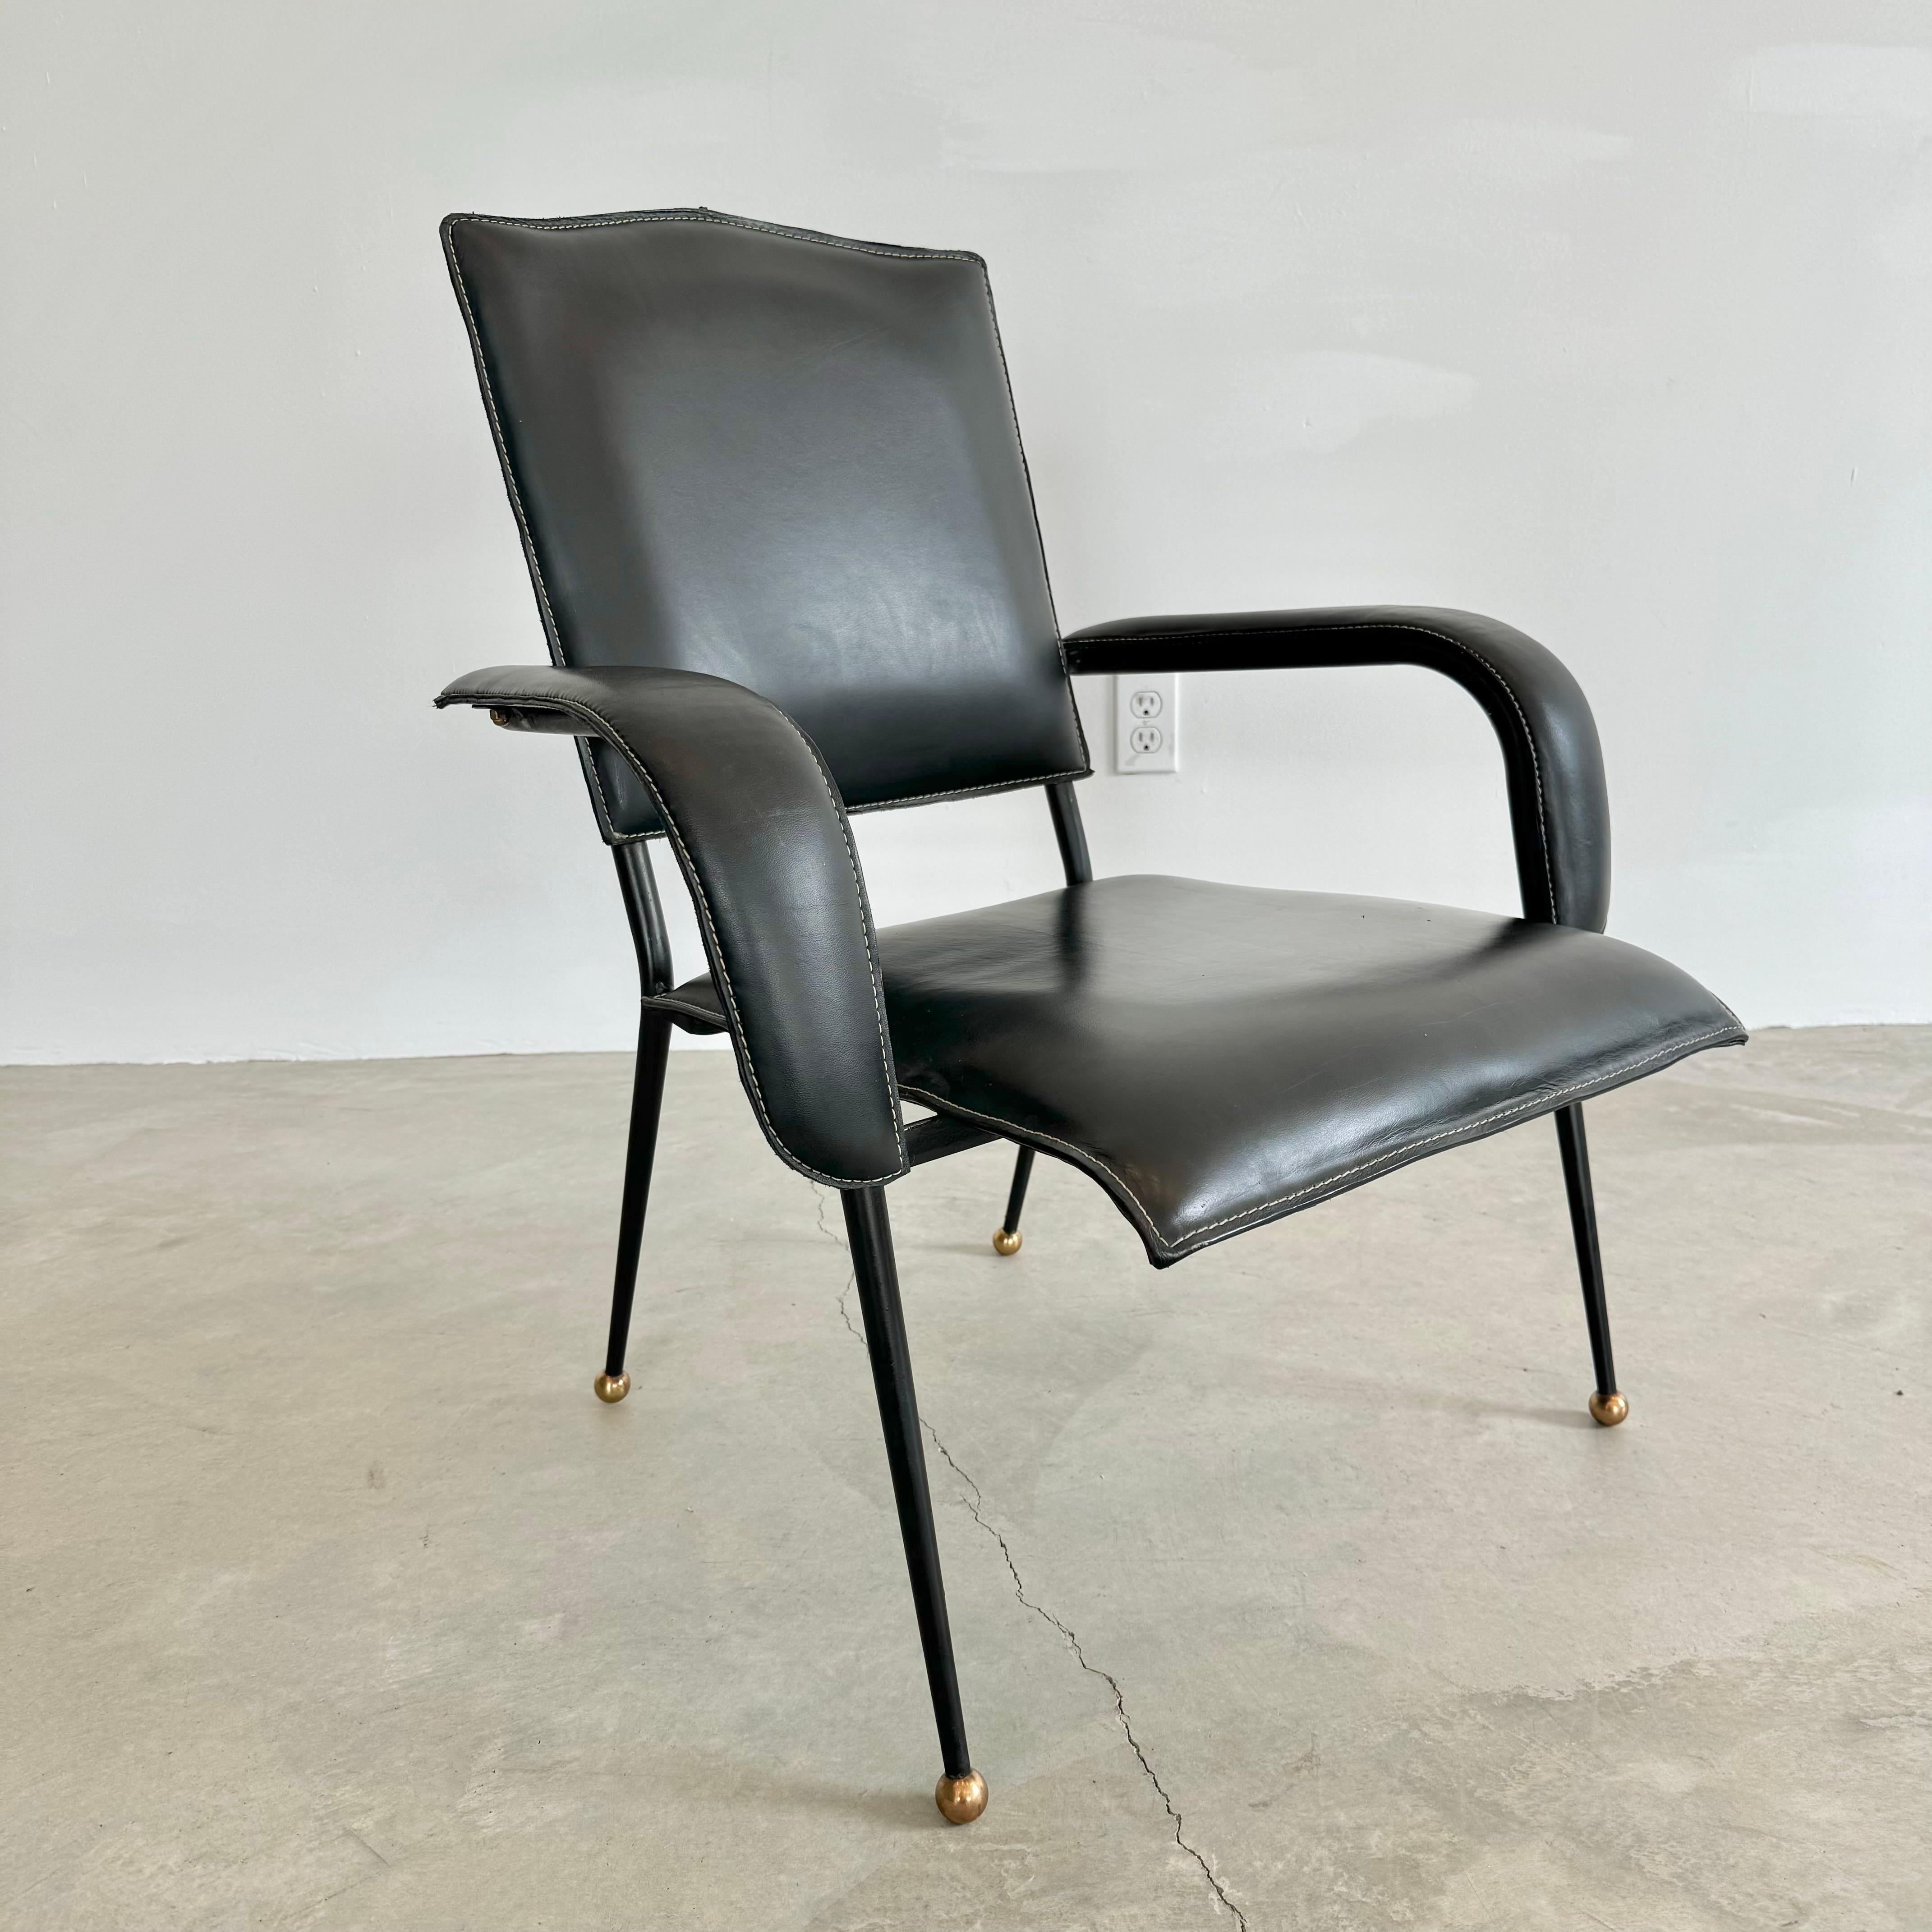 Mid-20th Century Jacques Adnet Black Leather Armchair, 1950s France For Sale